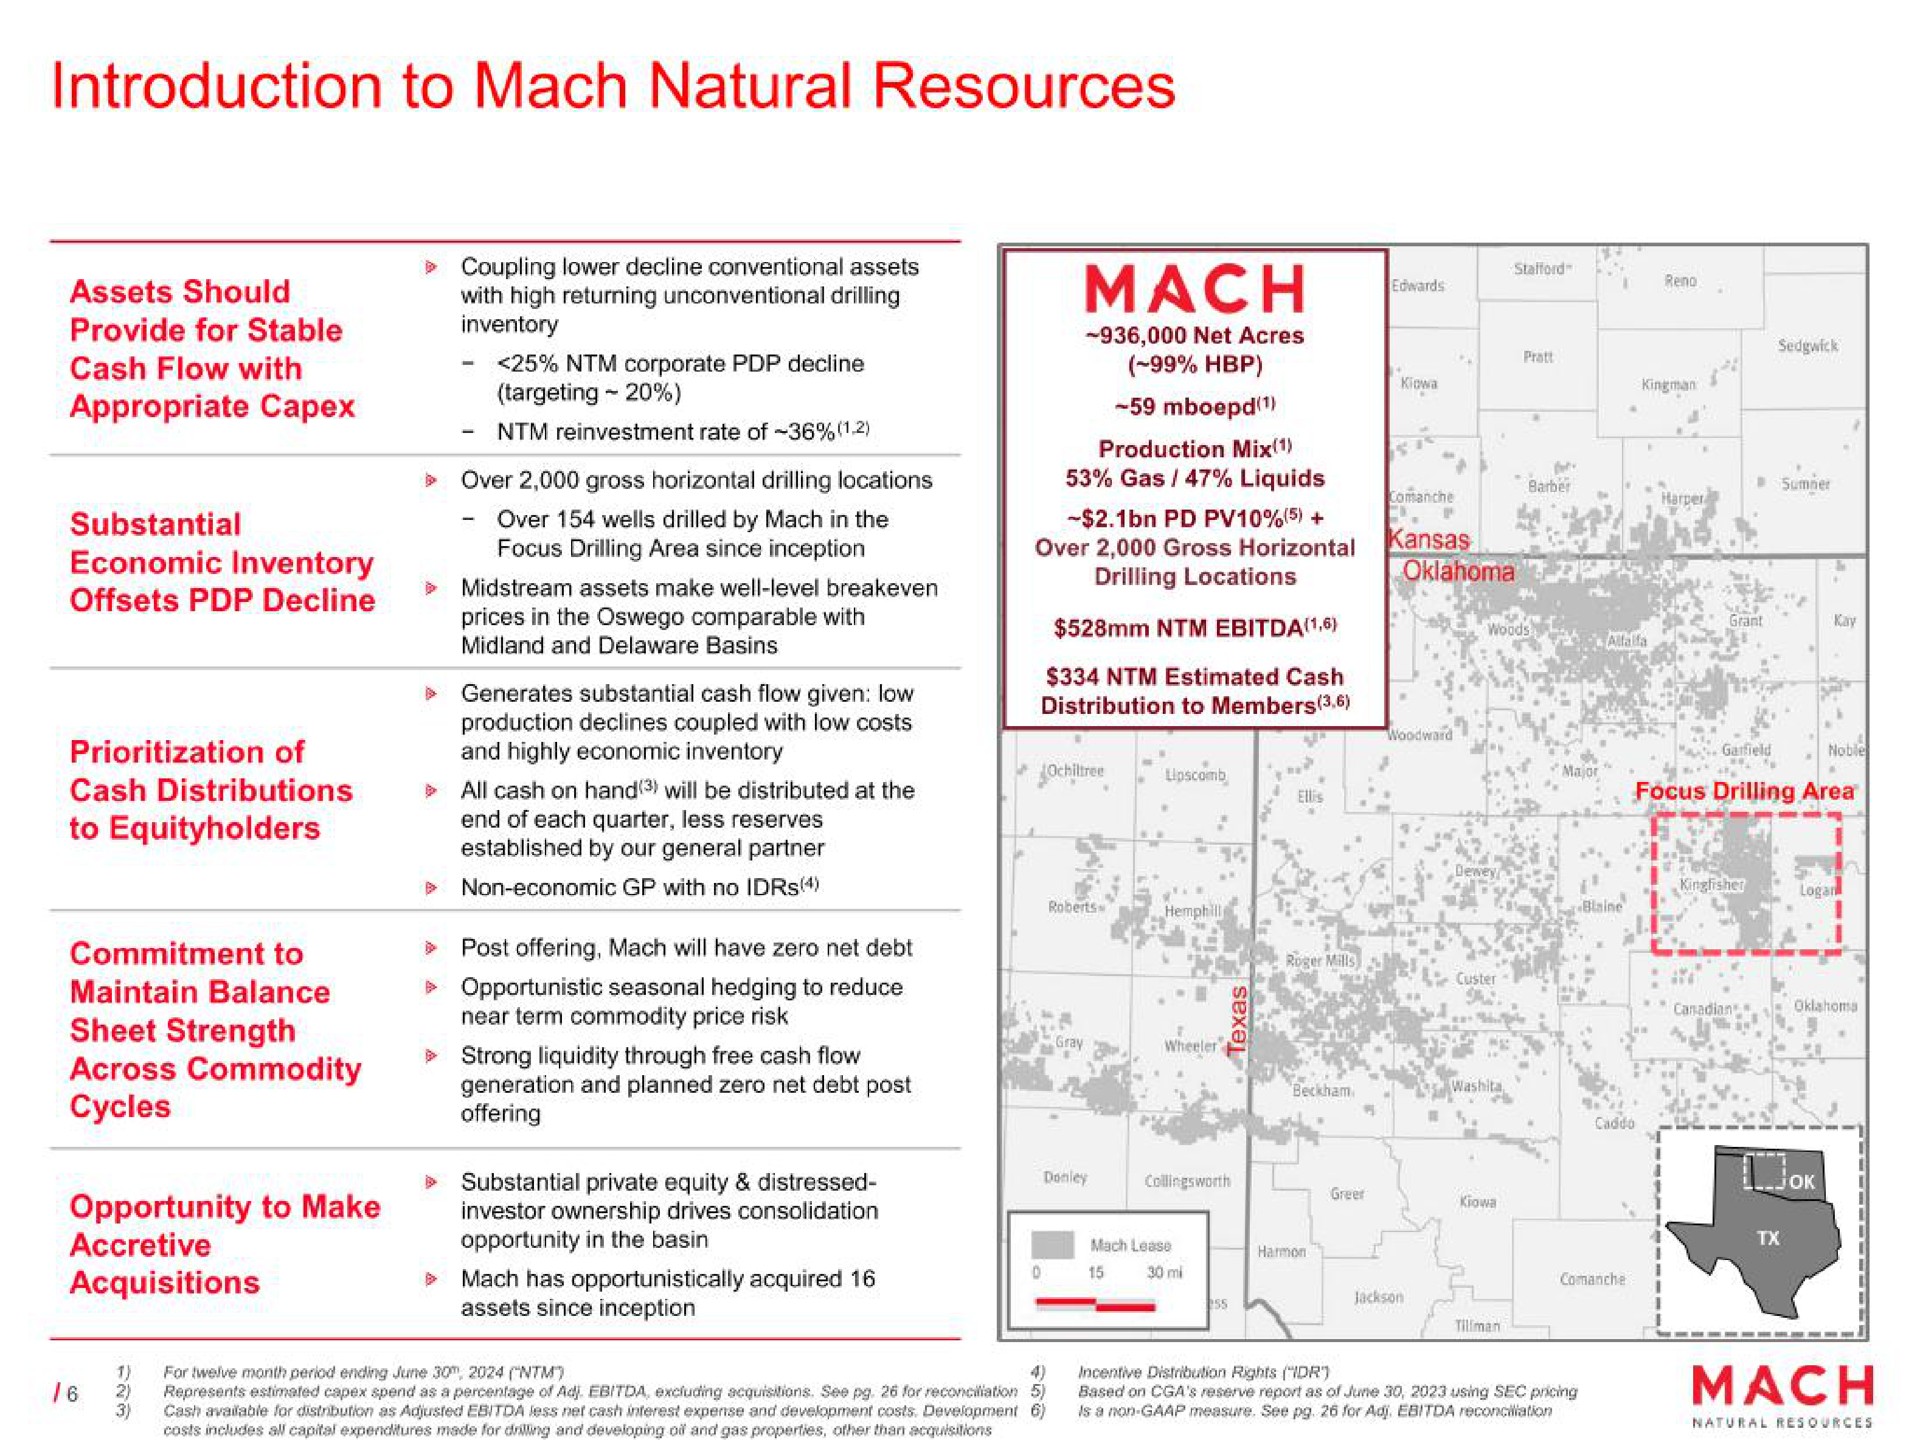 introduction to natural resources | Mach Natural Resources